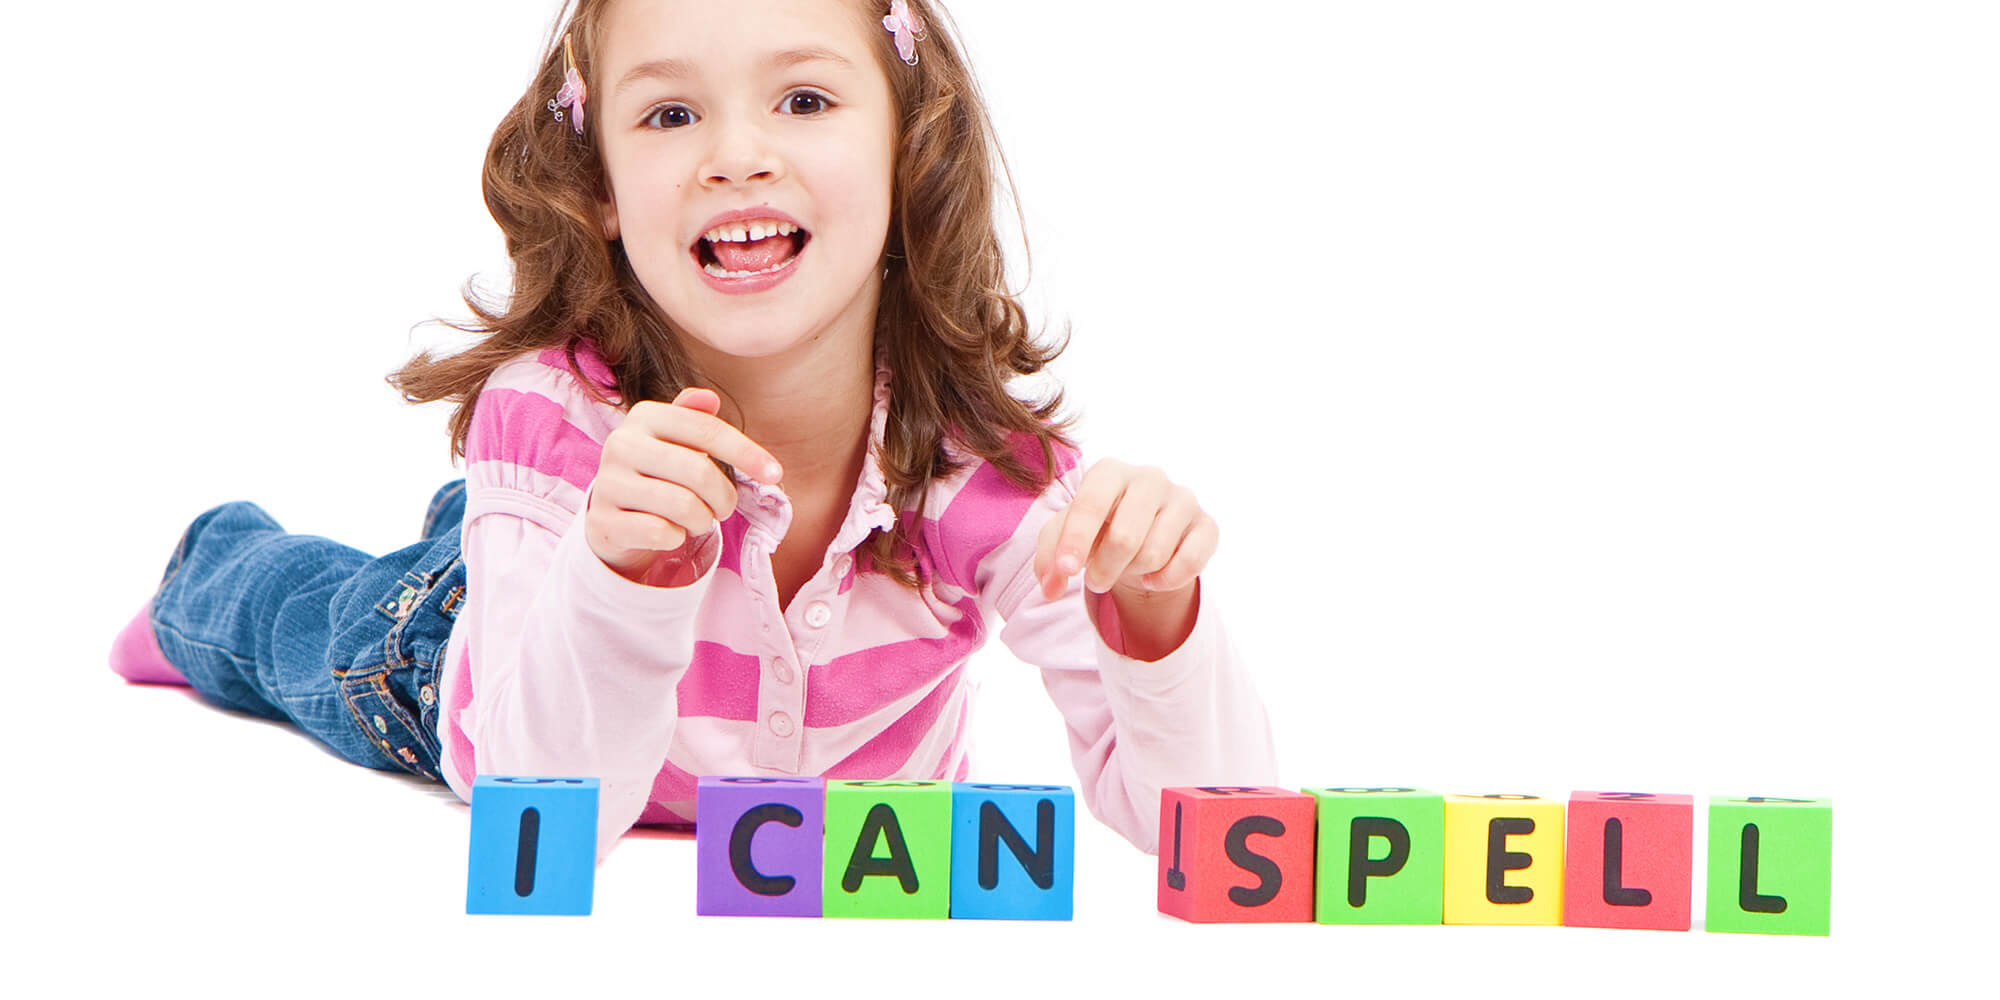 picture of girl with spelling I can spell